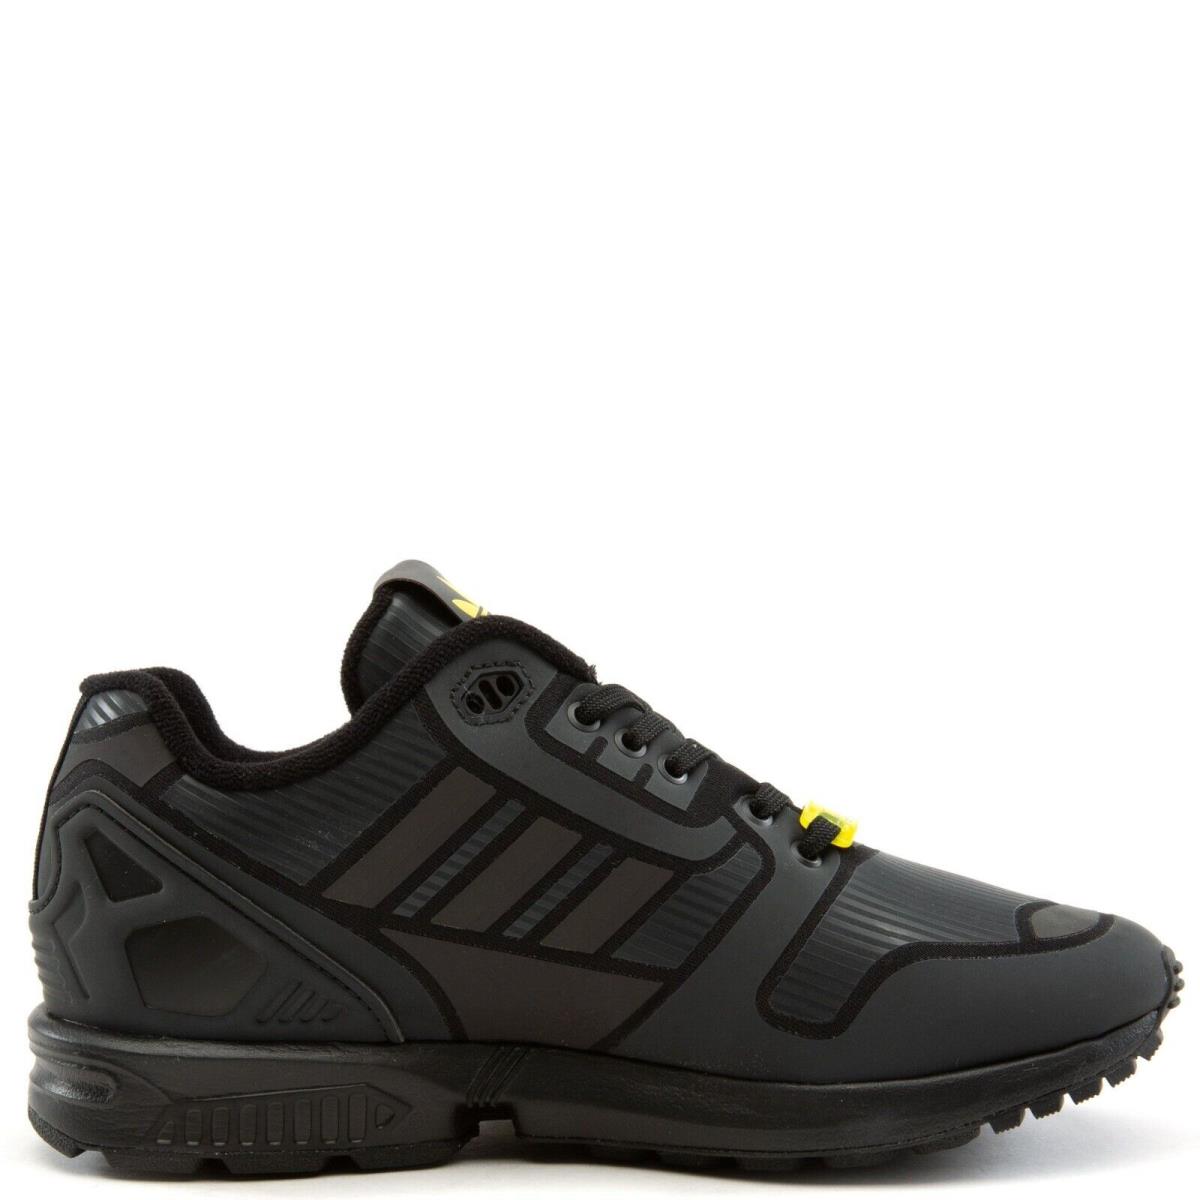 Adidas Zx Flux J Reveal B54178 Youth Black Grade School Shoes Size US 4Y HS4059